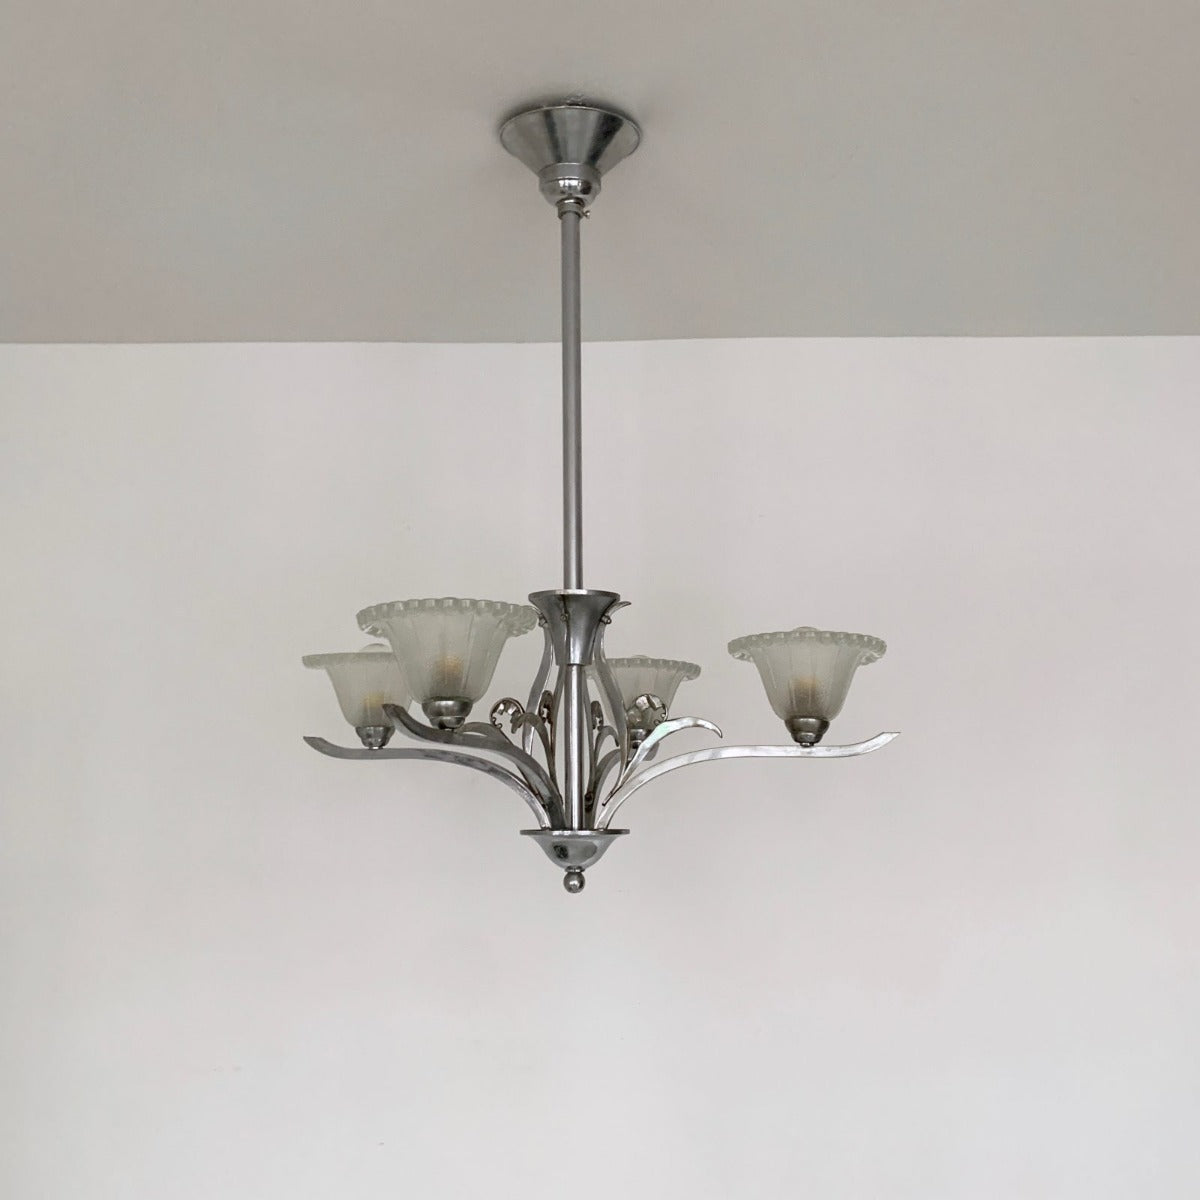 Art Deco Silver Nickelled Chandelier With Frosted Glass Shades